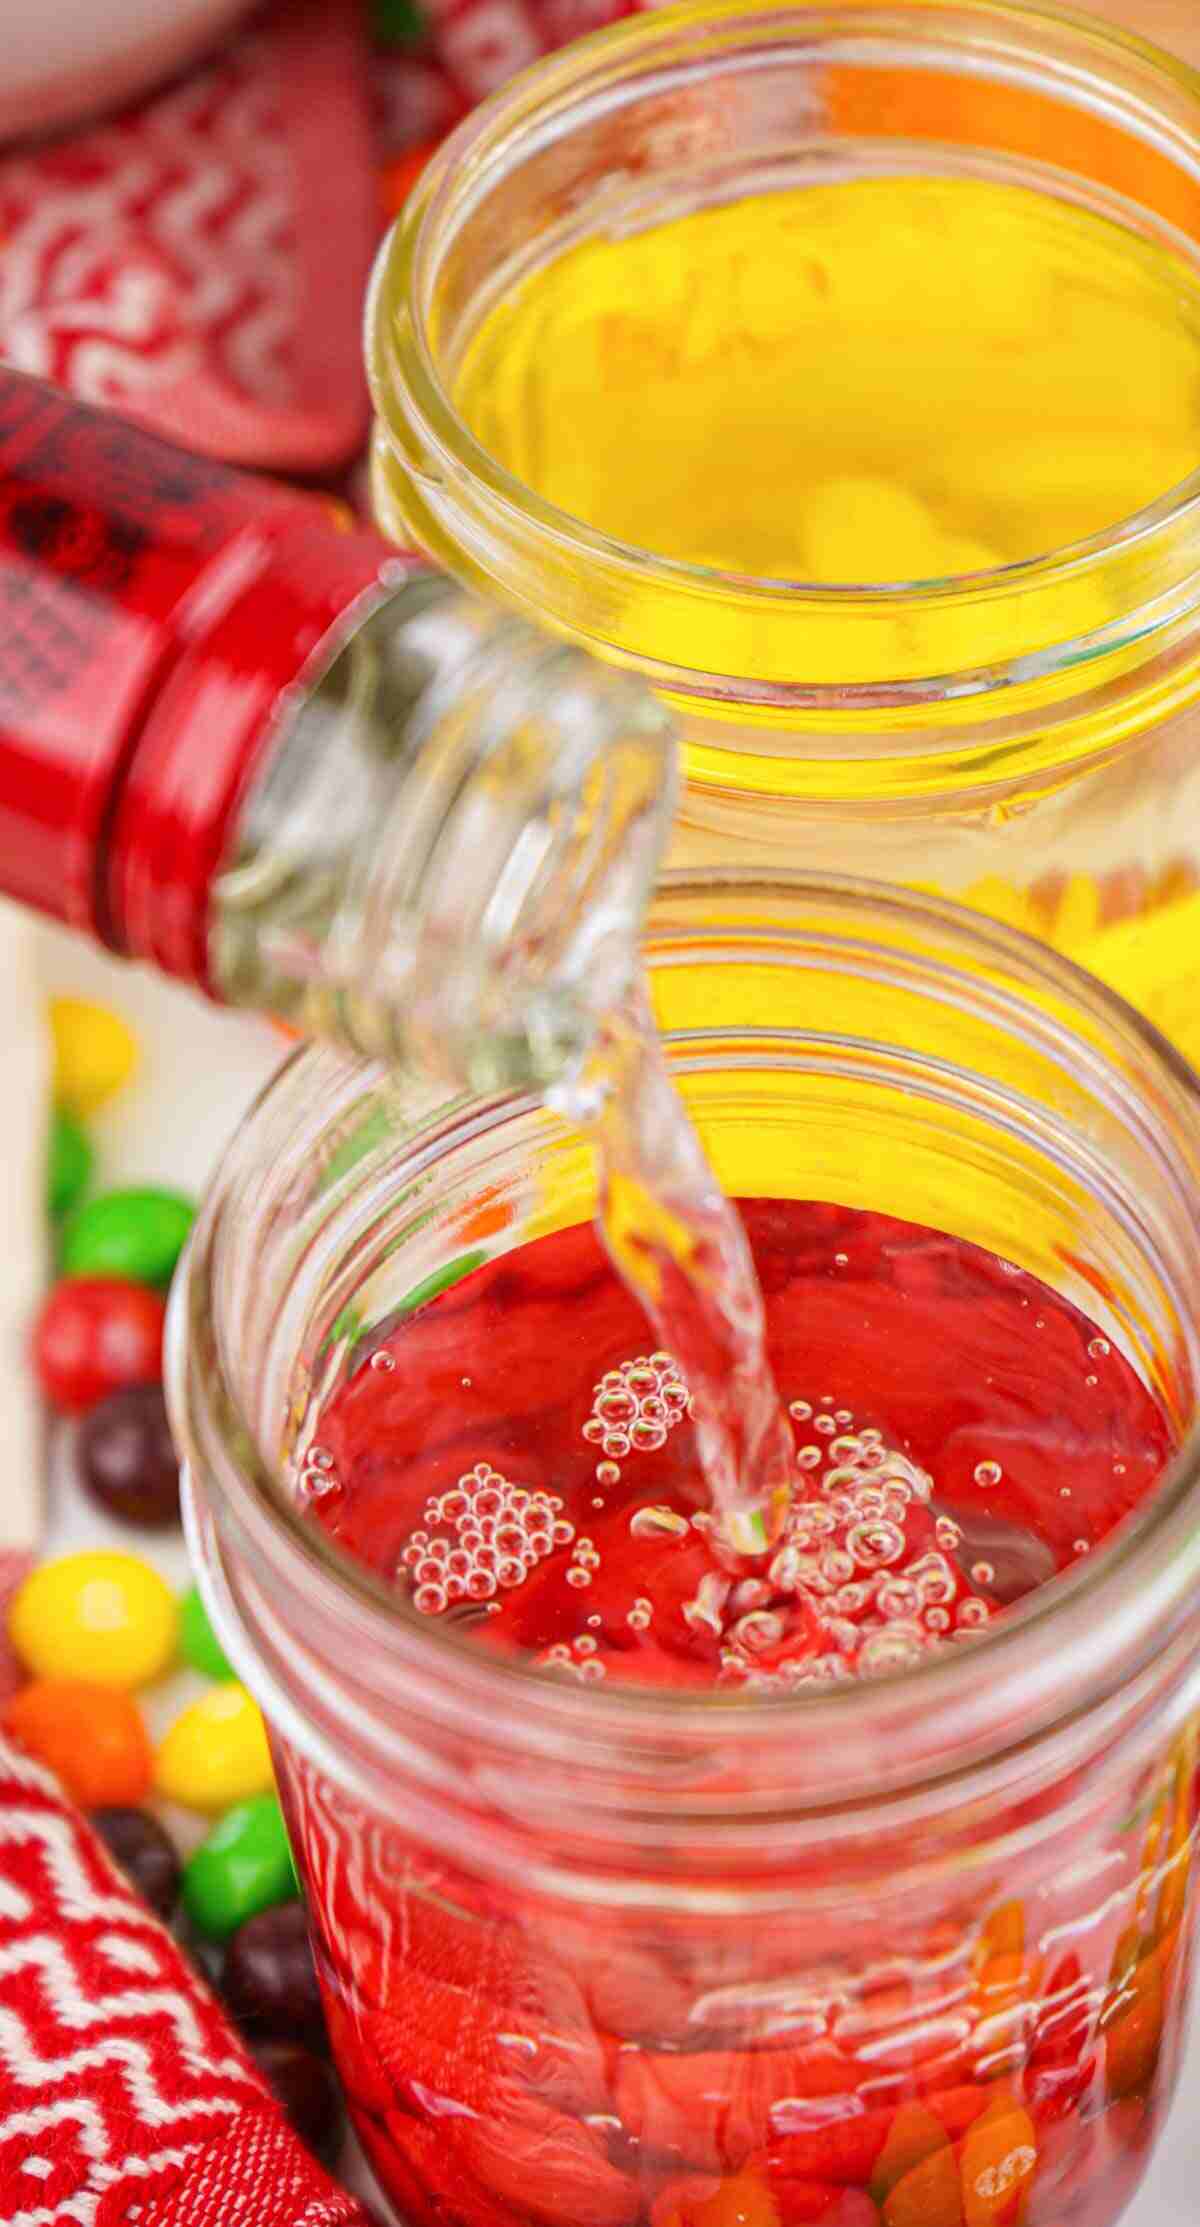 close up view of vodka being added to the jar with the red Skittles